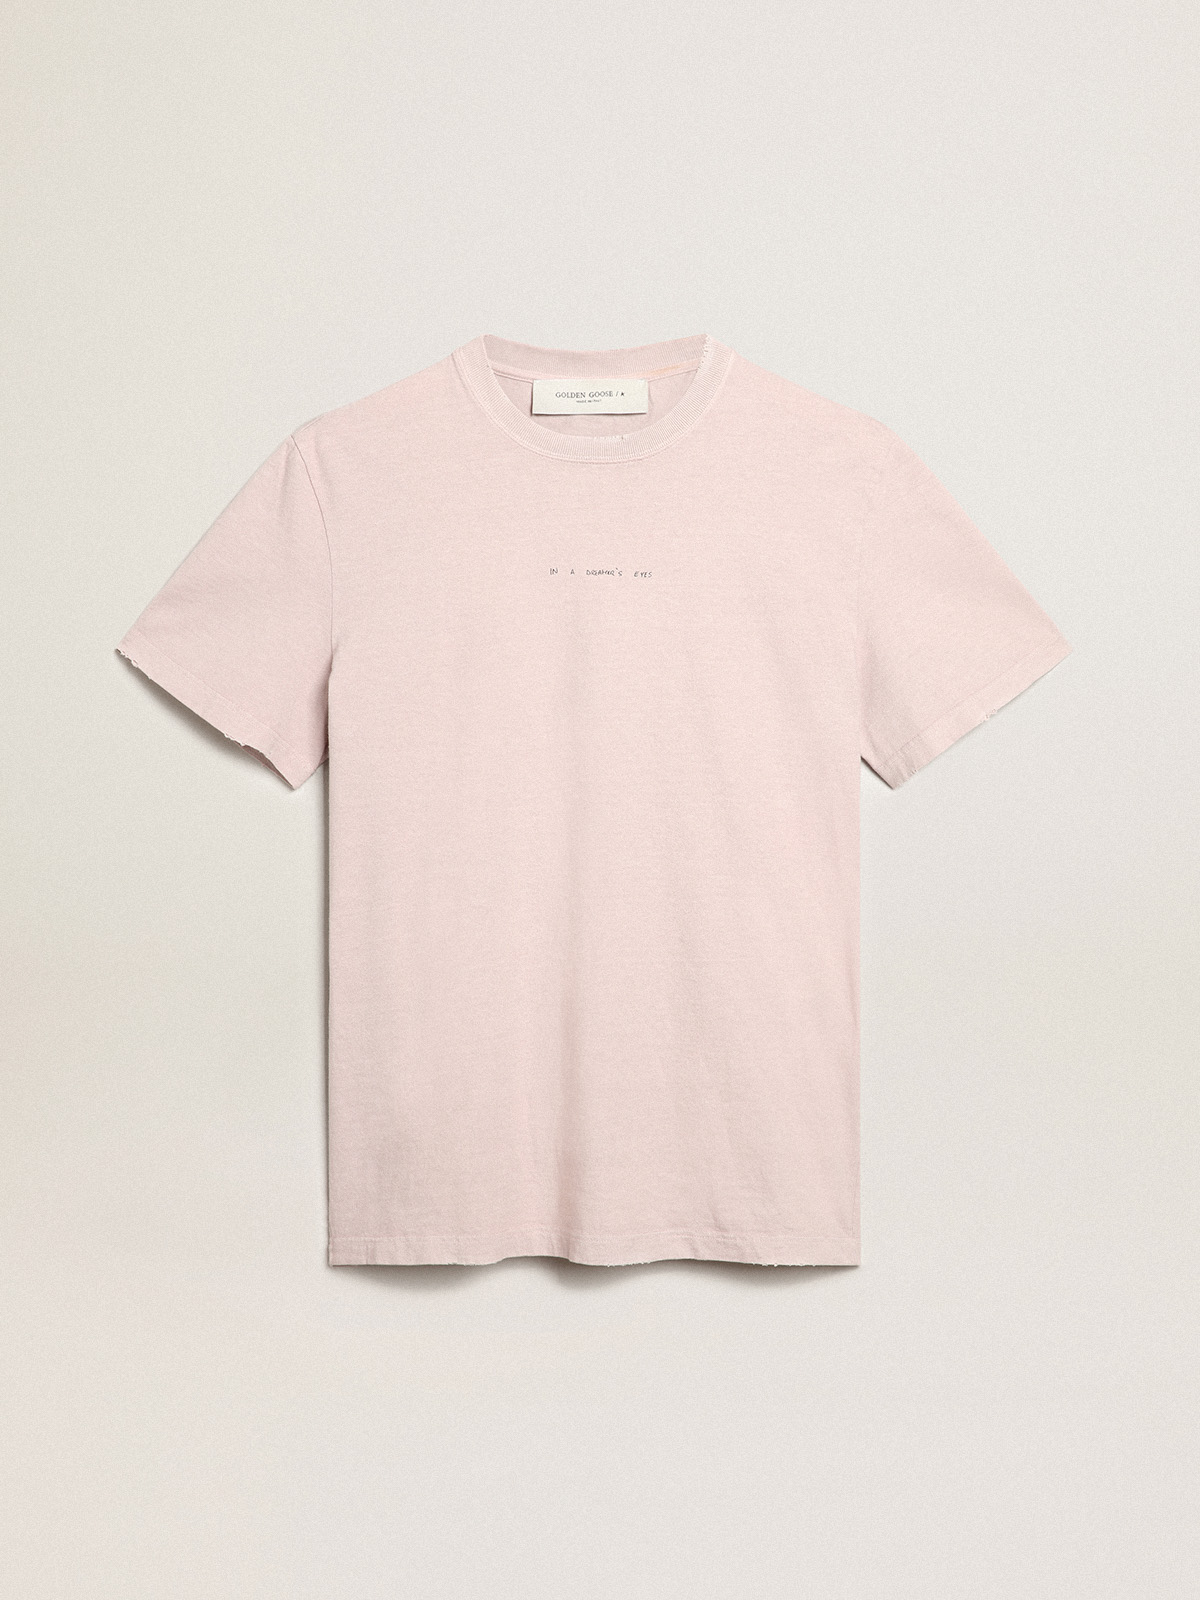 Pale pink men's T-shirt with lettering in the center